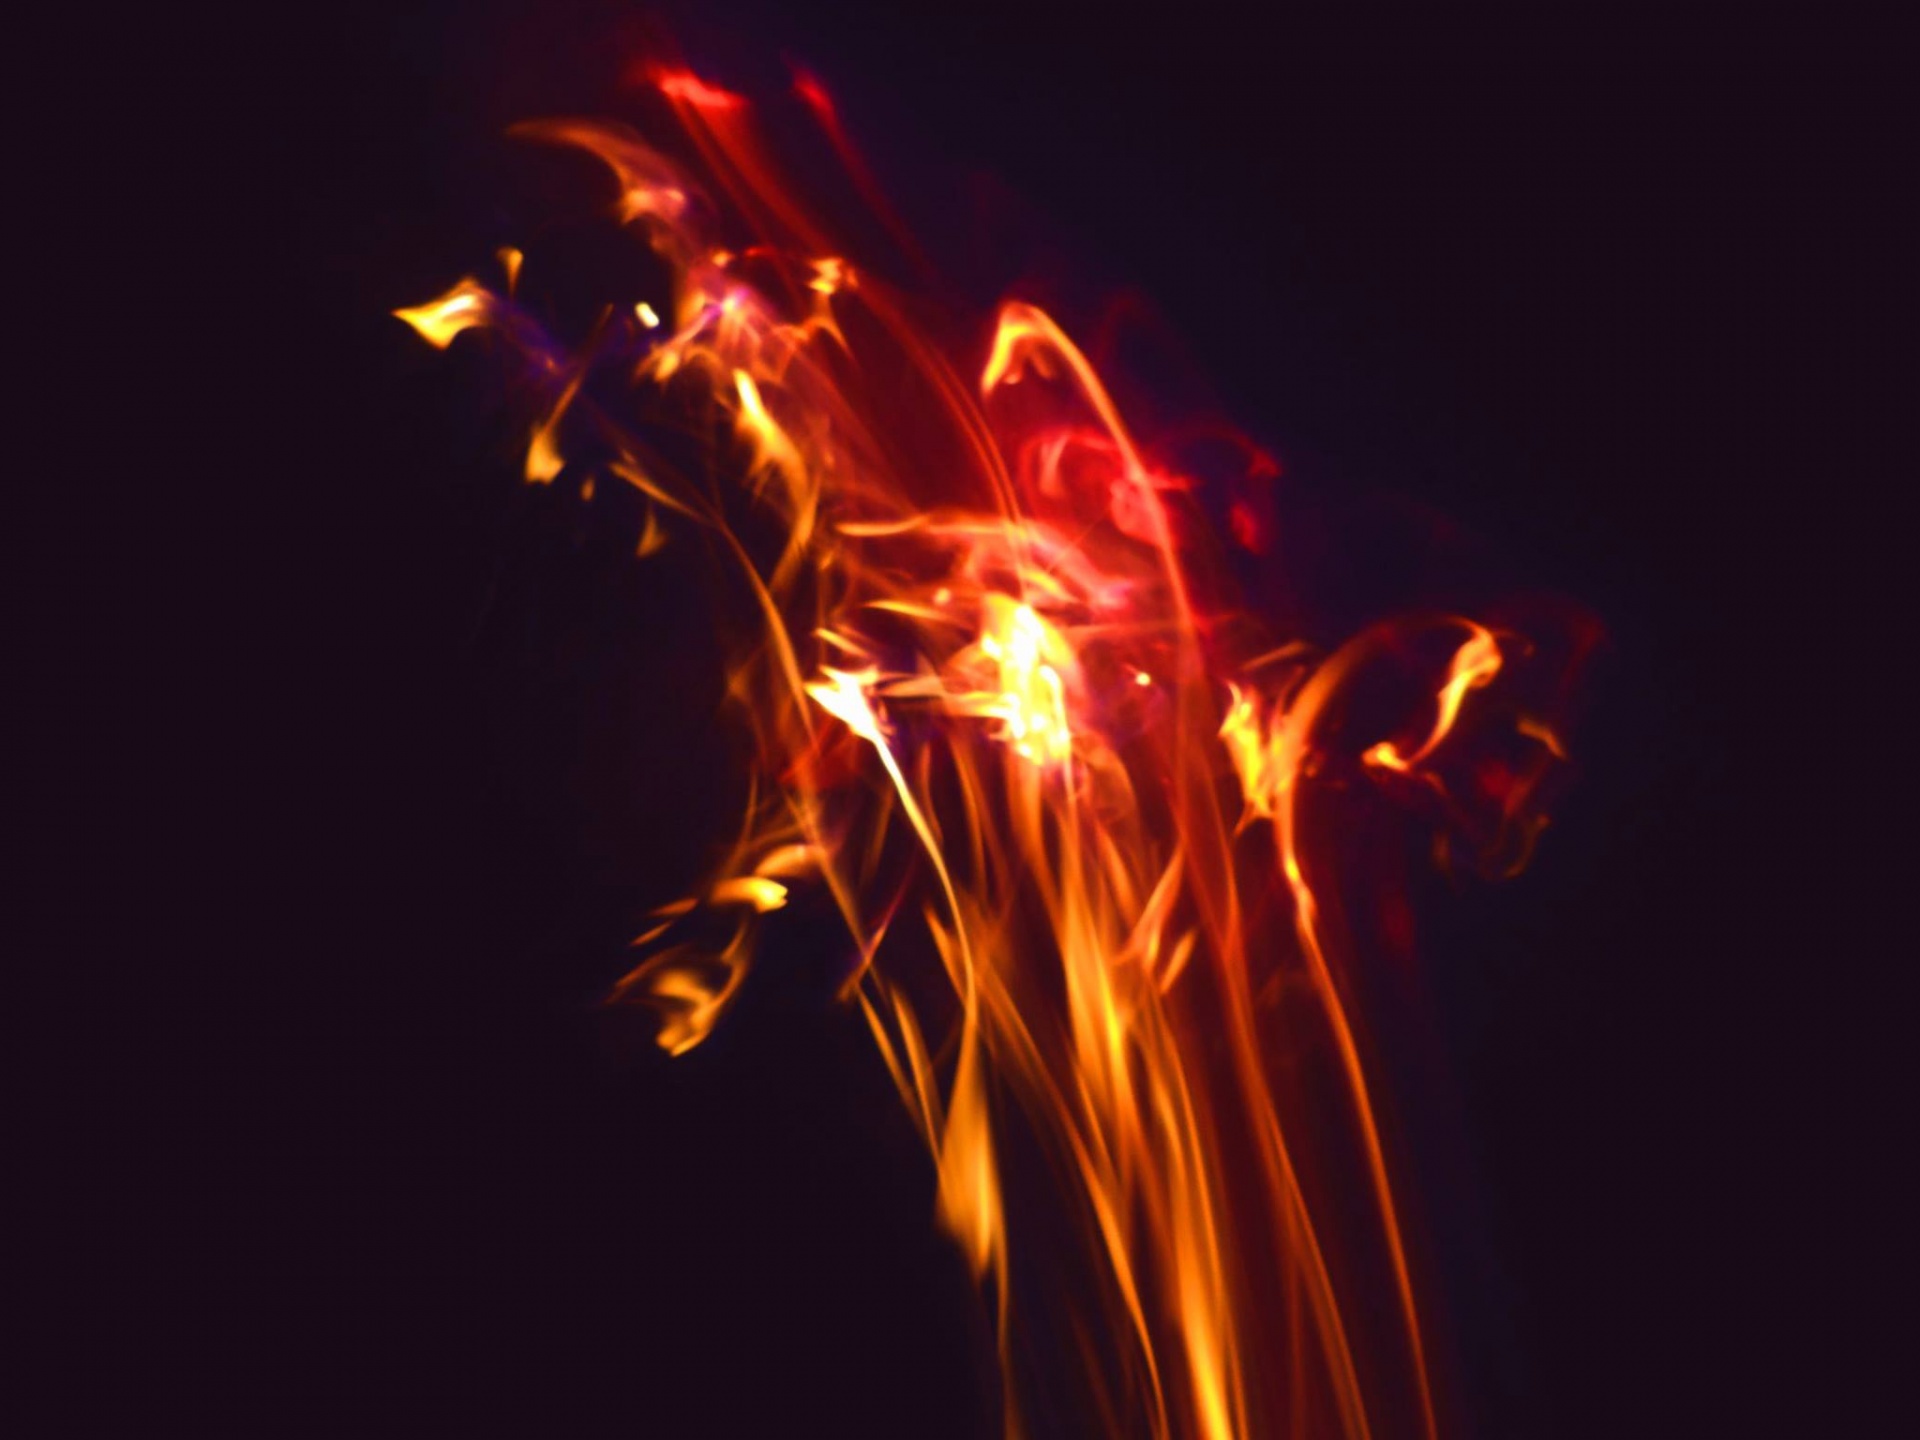 bonfire at night fire abstract photography free photo